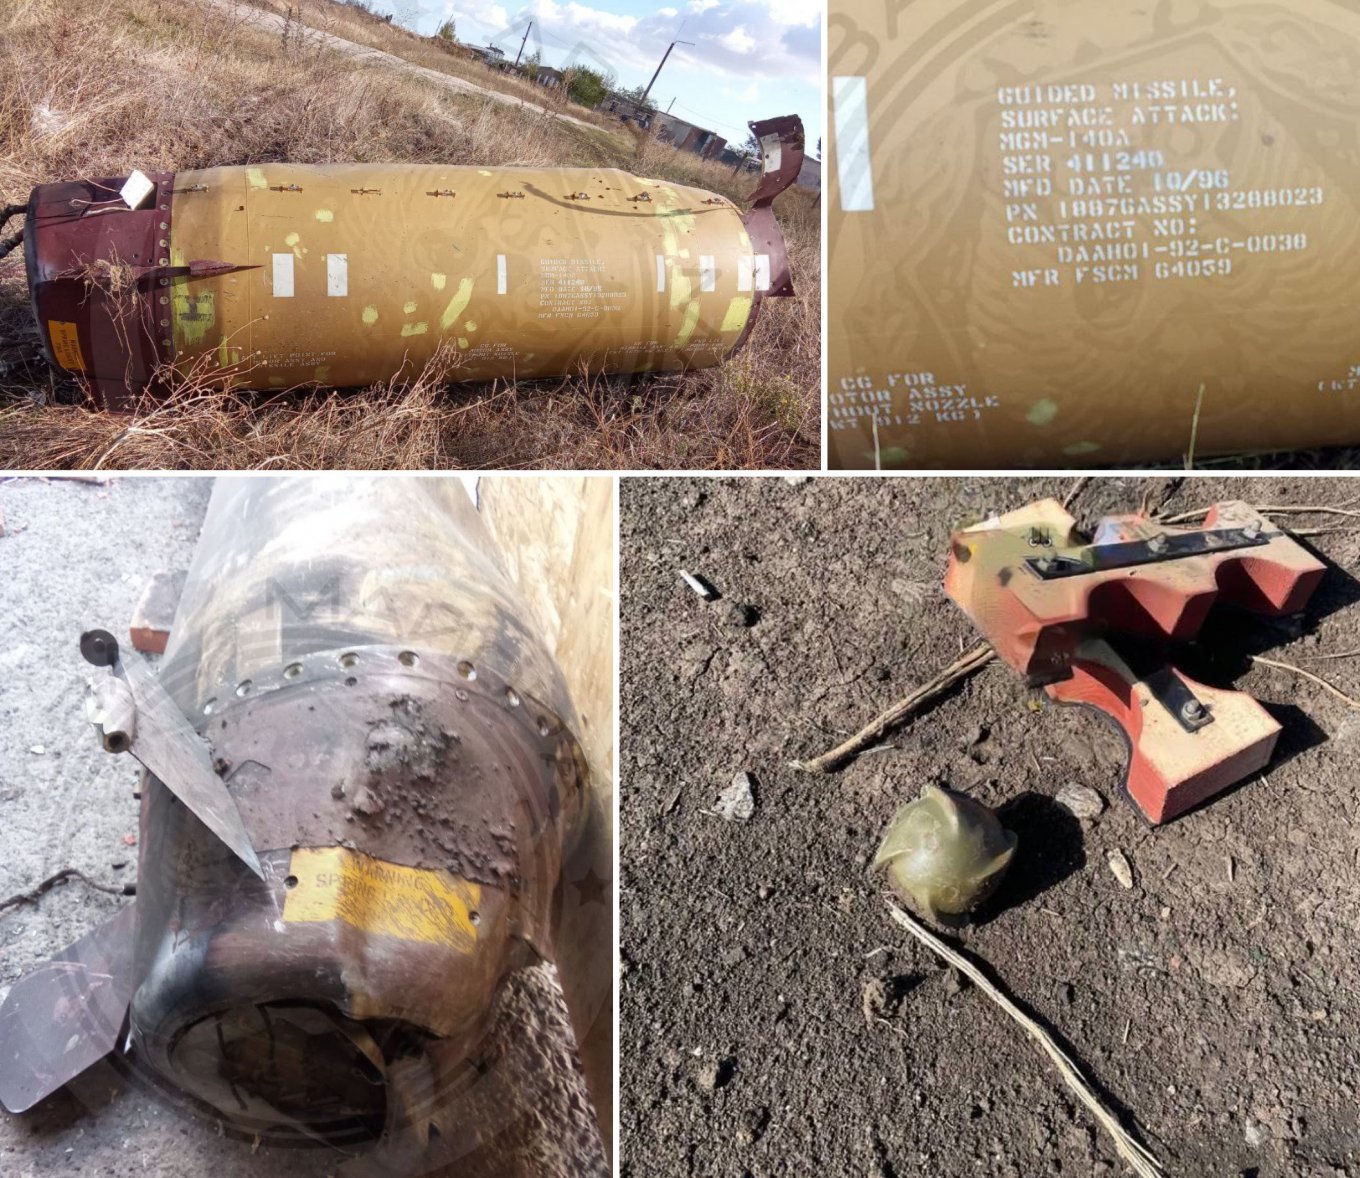 Fragments of the MGM-140A missile, known also as M39 or ATACMS Block I, found by Russians in Berdiansk